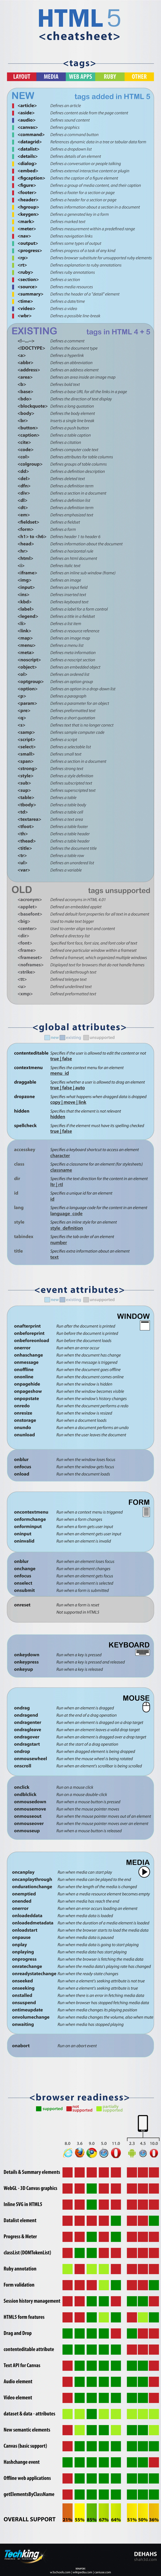 ultimate-html5-cheat-sheet-infographic